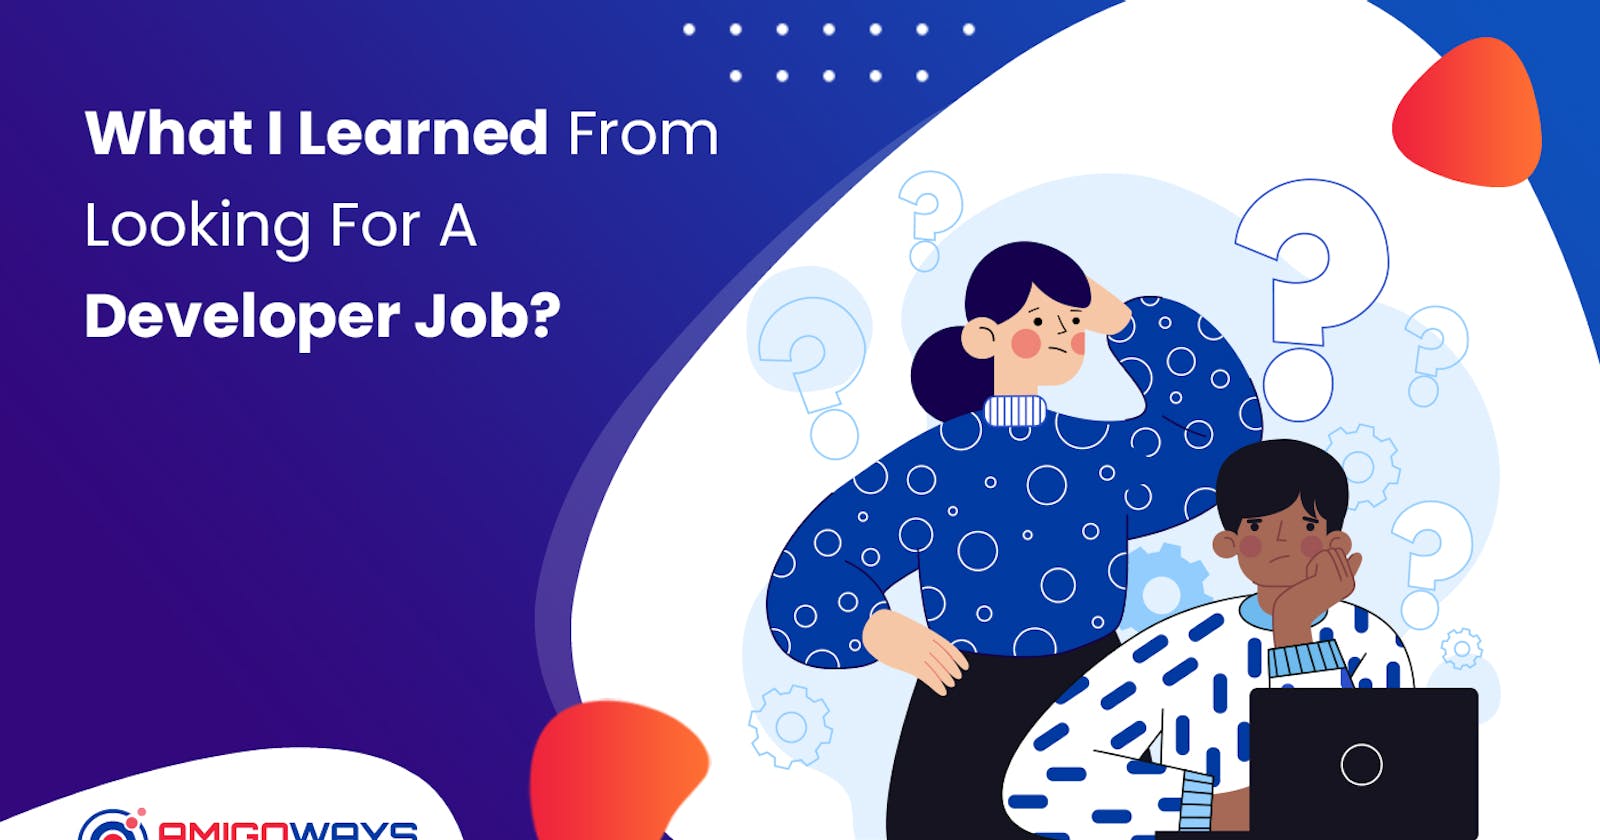 What I Learned From Looking For A Developer Job? - Amigoways